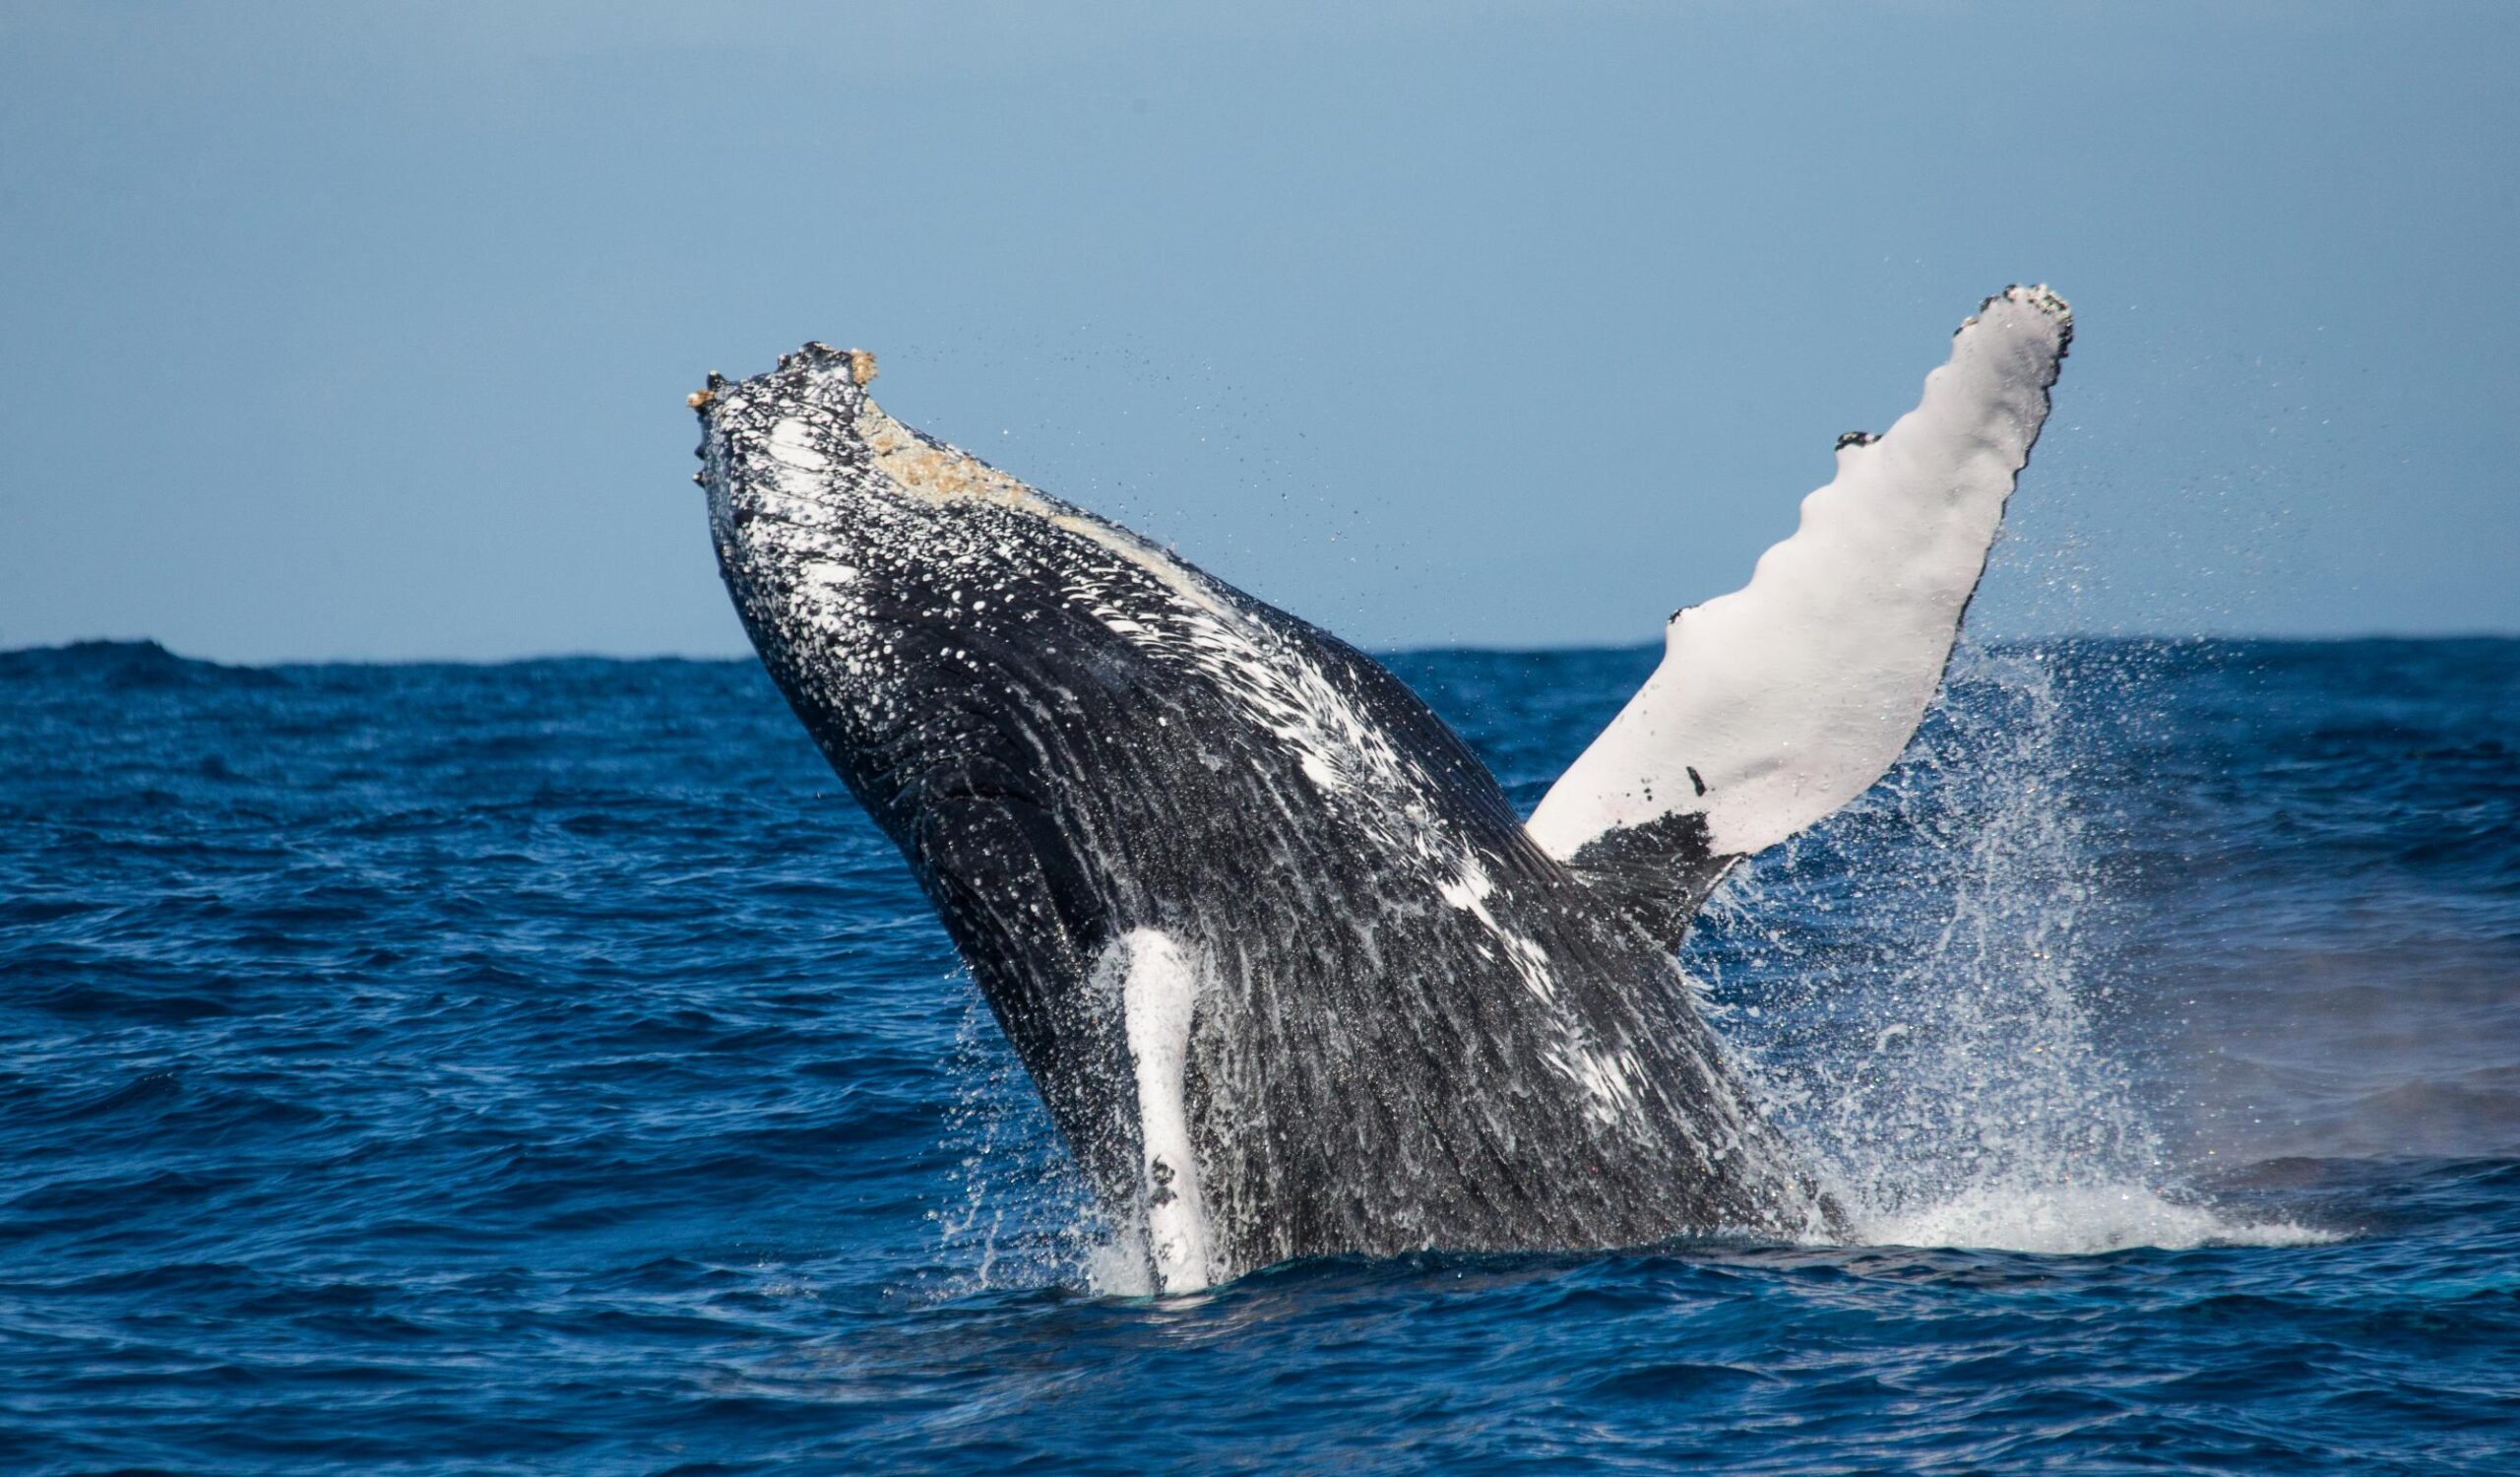 humpback-whale-is-jumping-out-water (2)